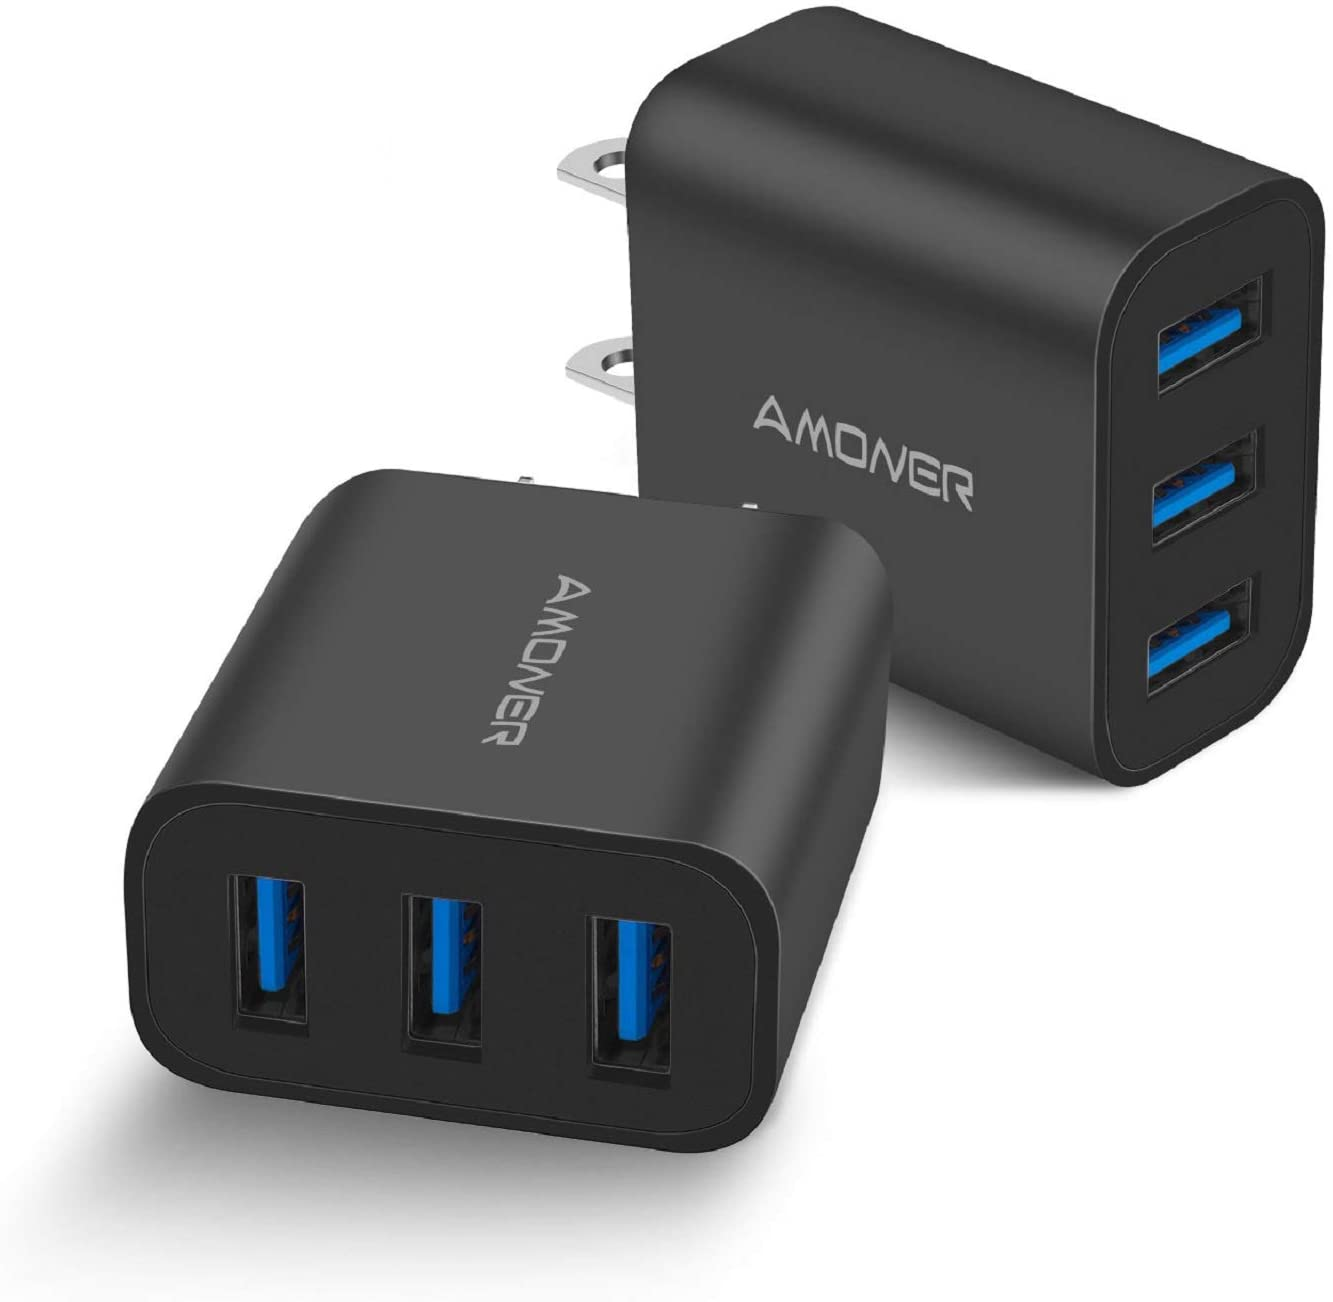 2 Pack Wall Charger, Amoner Upgraded 15W 3-Port USB Plug Cube Portable Wall Charger Plug for Iphone 12Mini/12/11/Pro/Promax/Xs/Xr/X/8/7, Ipad Pro/Air 2, Galaxy10/9, Note10/9, and More